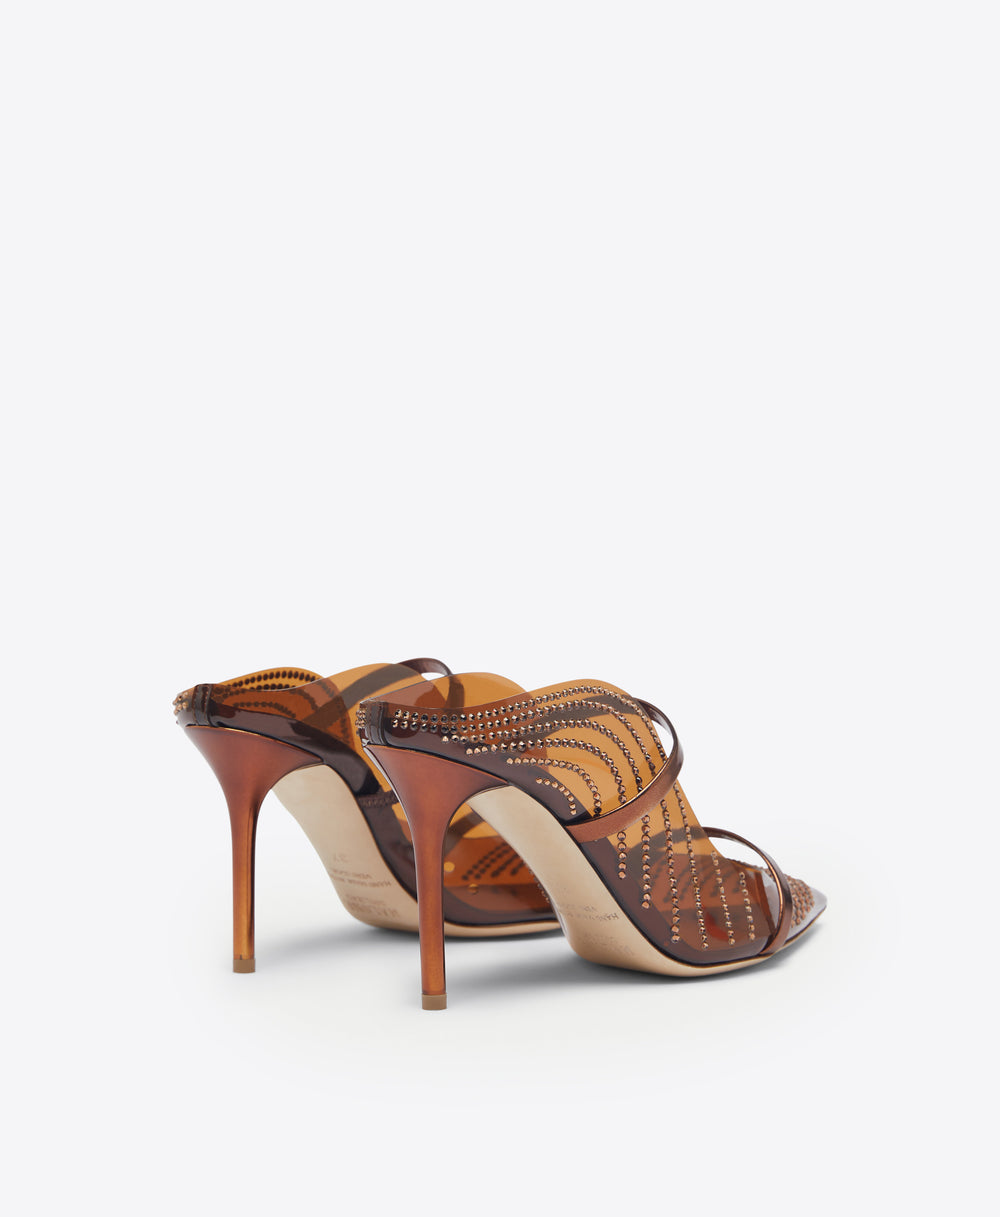 Malone Souliers Maureen 85mm Brown Embellished PVC Mules